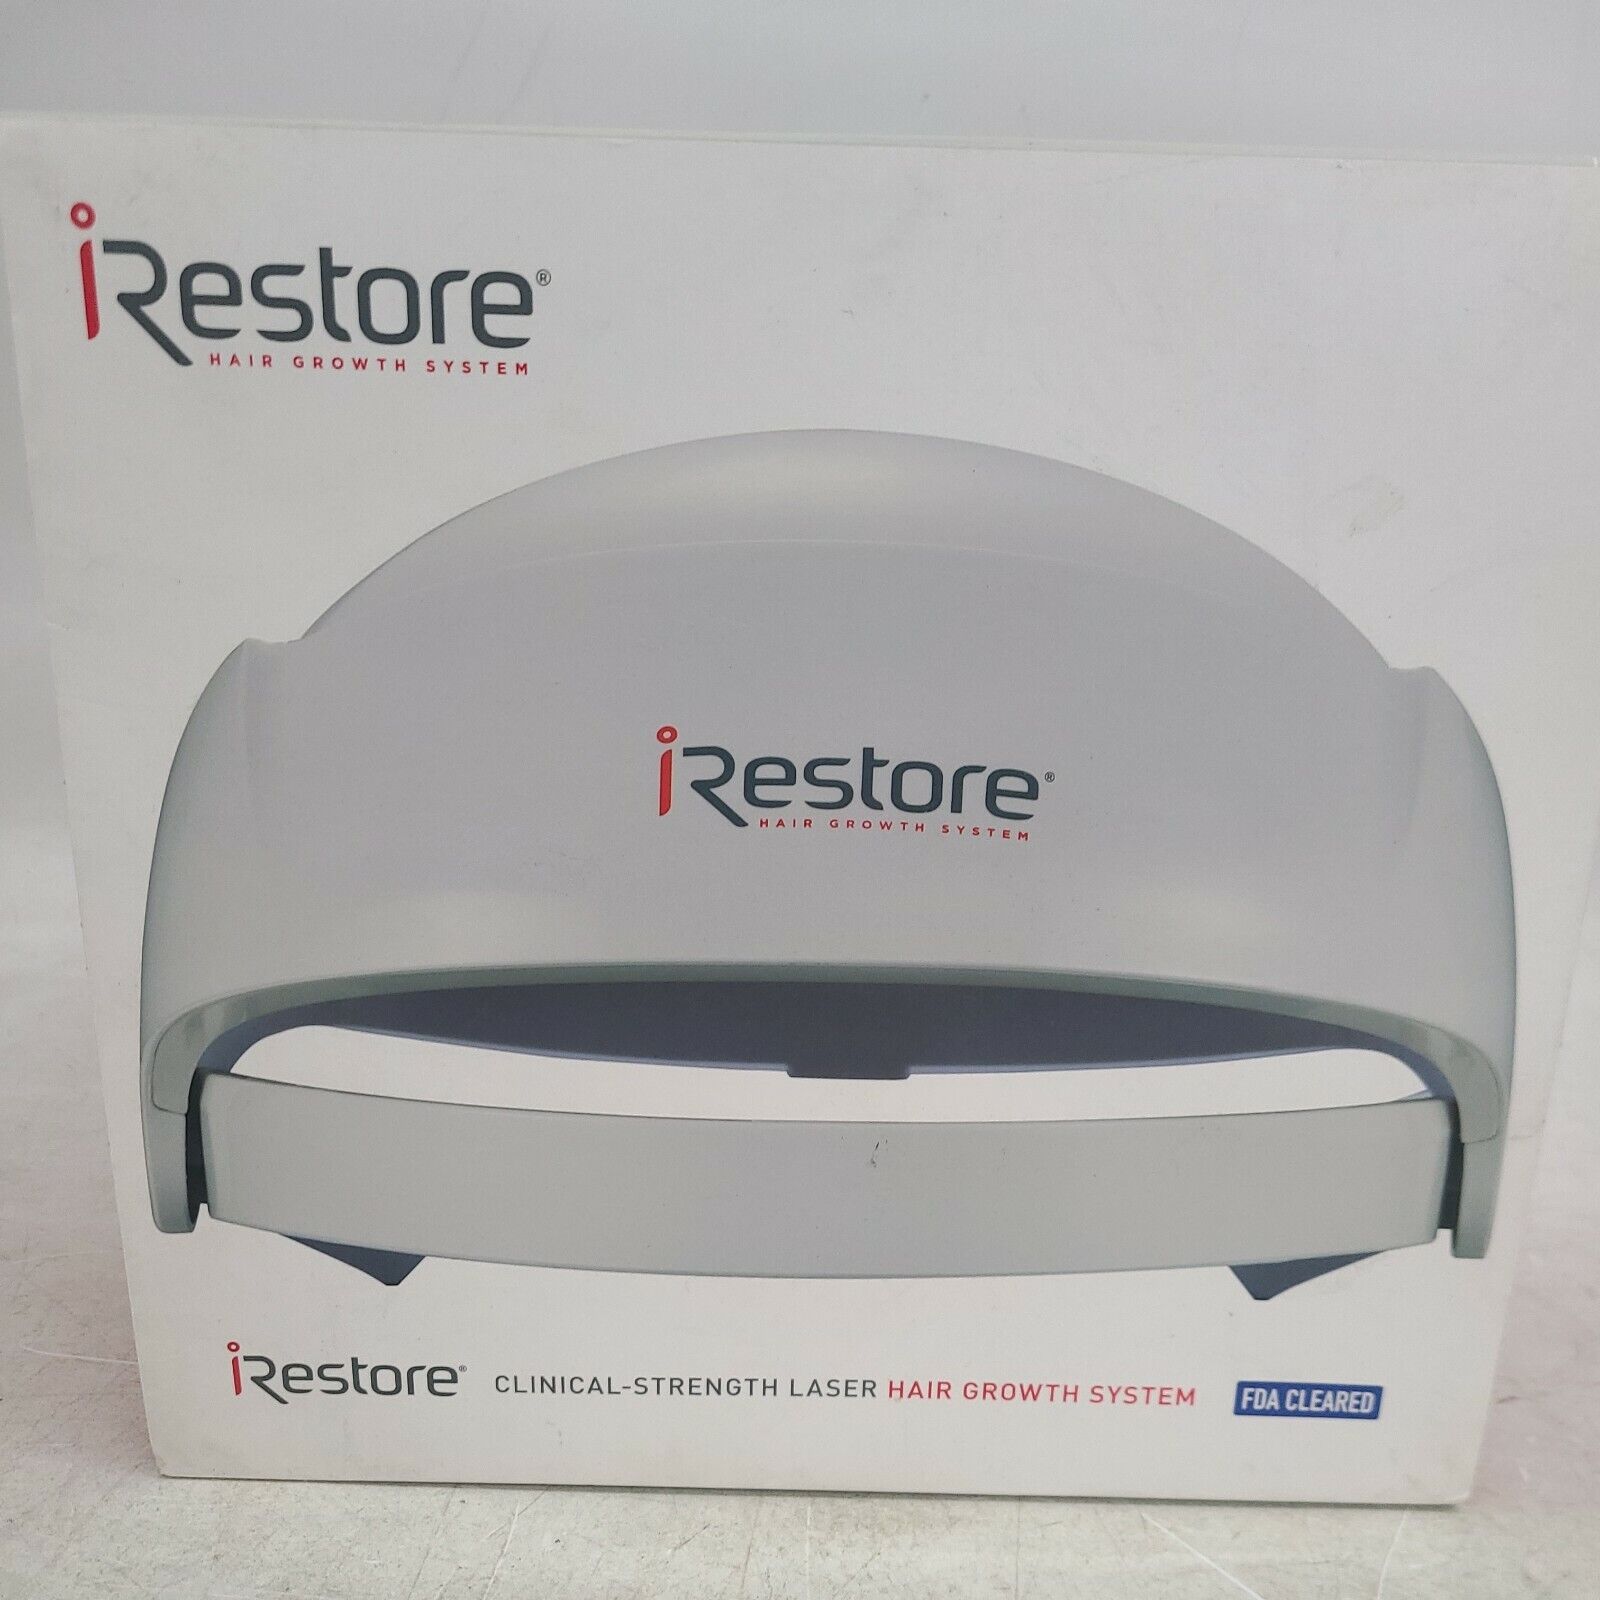 iRestore Laser Super popular specialty store Inexpensive Hair Growth Used System Essential Lightly